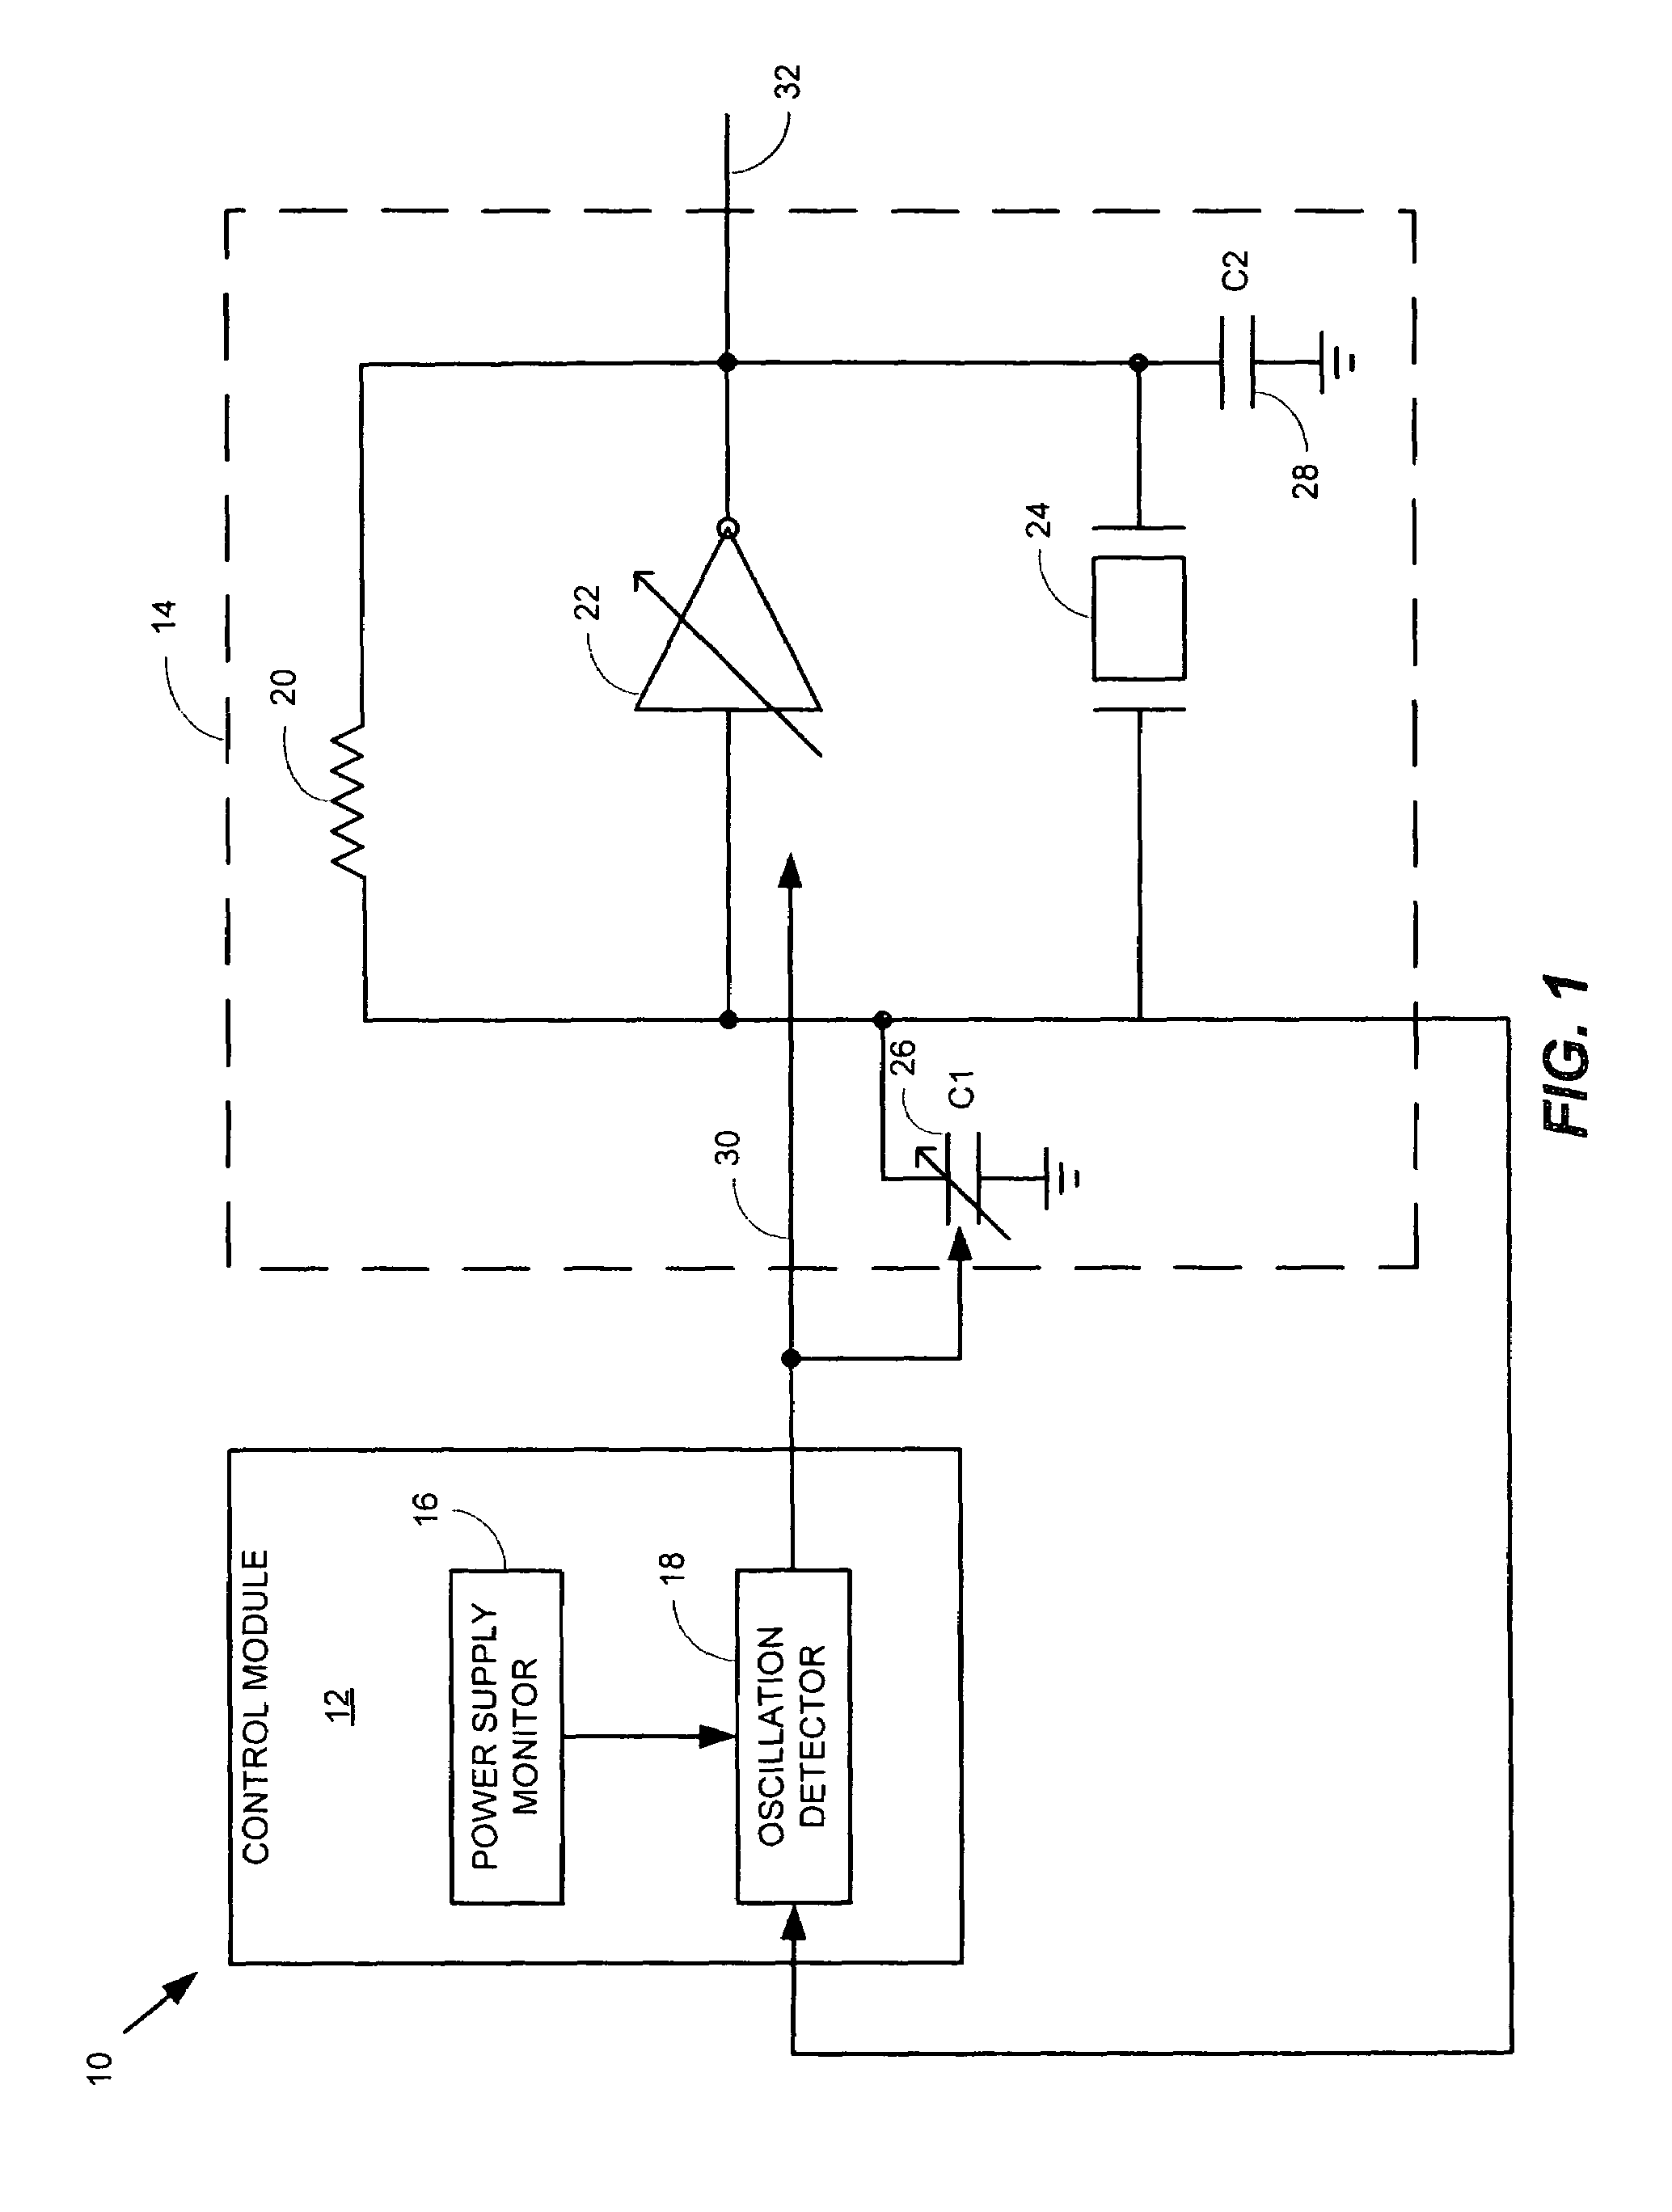 Method and apparatus for a crystal oscillator to achieve fast start-up time, low power and frequency calibration